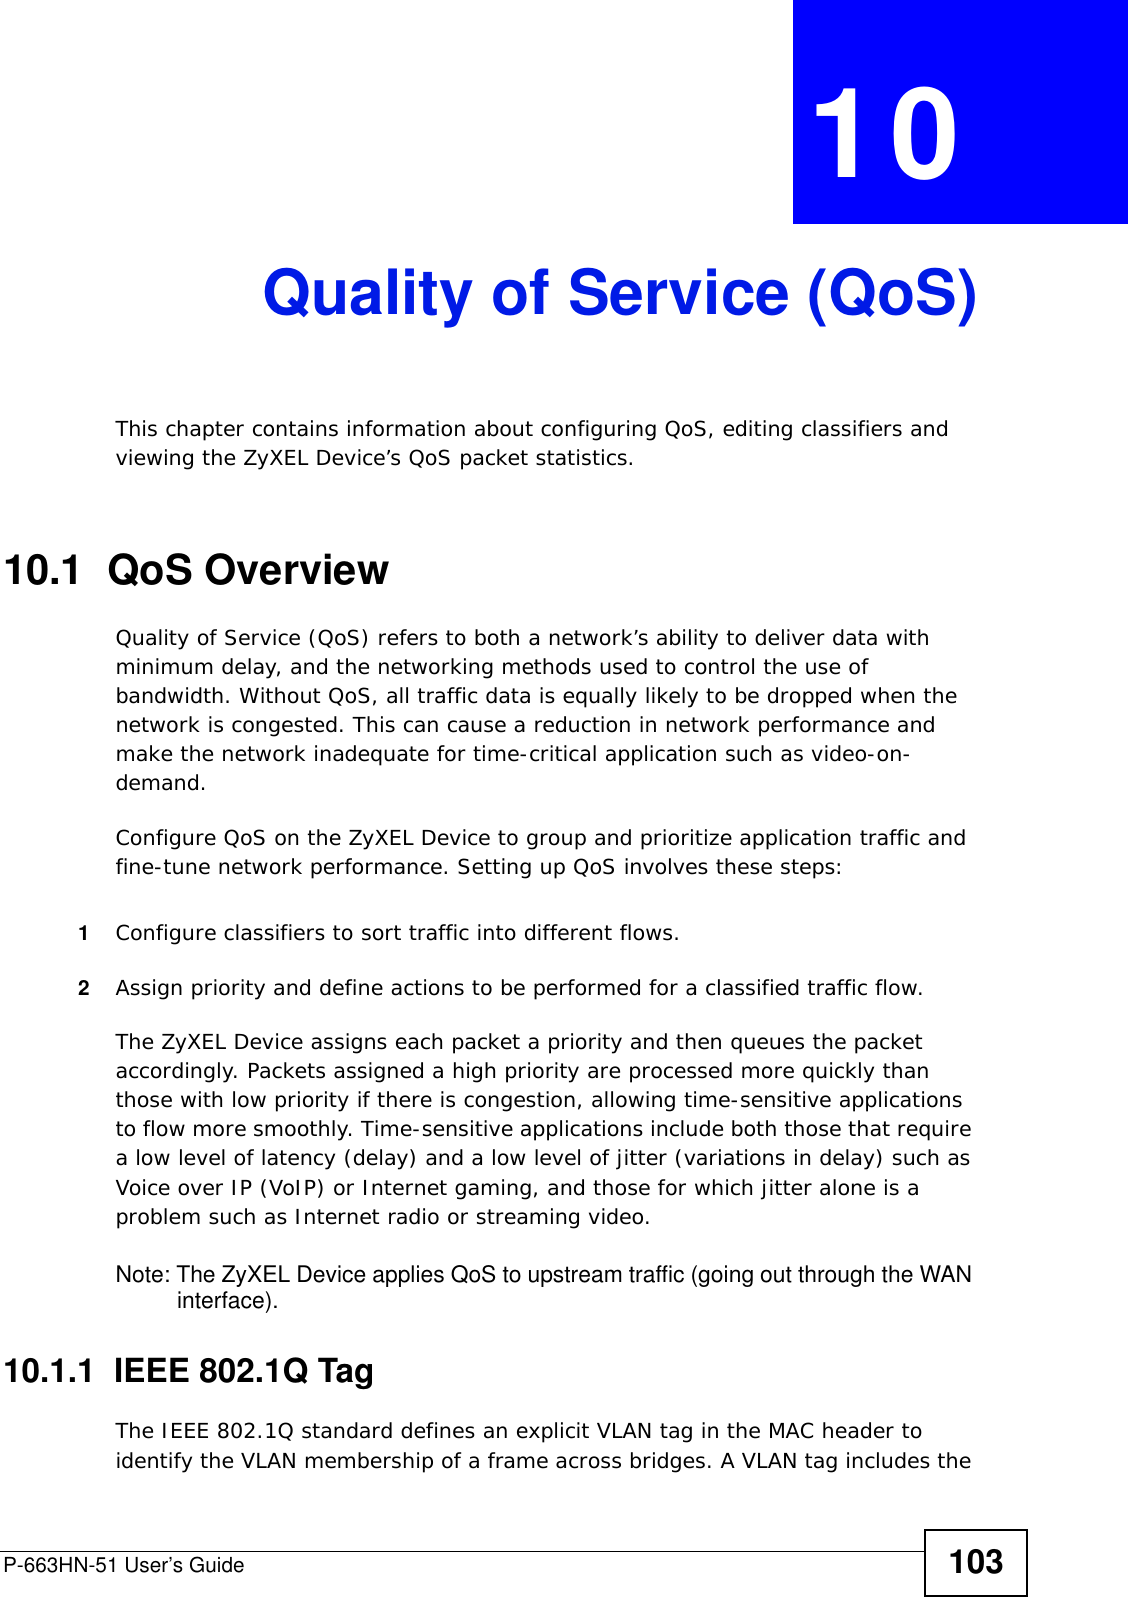 P-663HN-51 User’s Guide 103CHAPTER  10 Quality of Service (QoS)This chapter contains information about configuring QoS, editing classifiers and viewing the ZyXEL Device’s QoS packet statistics.10.1  QoS Overview Quality of Service (QoS) refers to both a network’s ability to deliver data with minimum delay, and the networking methods used to control the use of bandwidth. Without QoS, all traffic data is equally likely to be dropped when the network is congested. This can cause a reduction in network performance and make the network inadequate for time-critical application such as video-on-demand.Configure QoS on the ZyXEL Device to group and prioritize application traffic and fine-tune network performance. Setting up QoS involves these steps:1Configure classifiers to sort traffic into different flows. 2Assign priority and define actions to be performed for a classified traffic flow. The ZyXEL Device assigns each packet a priority and then queues the packet accordingly. Packets assigned a high priority are processed more quickly than those with low priority if there is congestion, allowing time-sensitive applications to flow more smoothly. Time-sensitive applications include both those that require a low level of latency (delay) and a low level of jitter (variations in delay) such as Voice over IP (VoIP) or Internet gaming, and those for which jitter alone is a problem such as Internet radio or streaming video.Note: The ZyXEL Device applies QoS to upstream traffic (going out through the WAN interface).10.1.1  IEEE 802.1Q TagThe IEEE 802.1Q standard defines an explicit VLAN tag in the MAC header to identify the VLAN membership of a frame across bridges. A VLAN tag includes the 